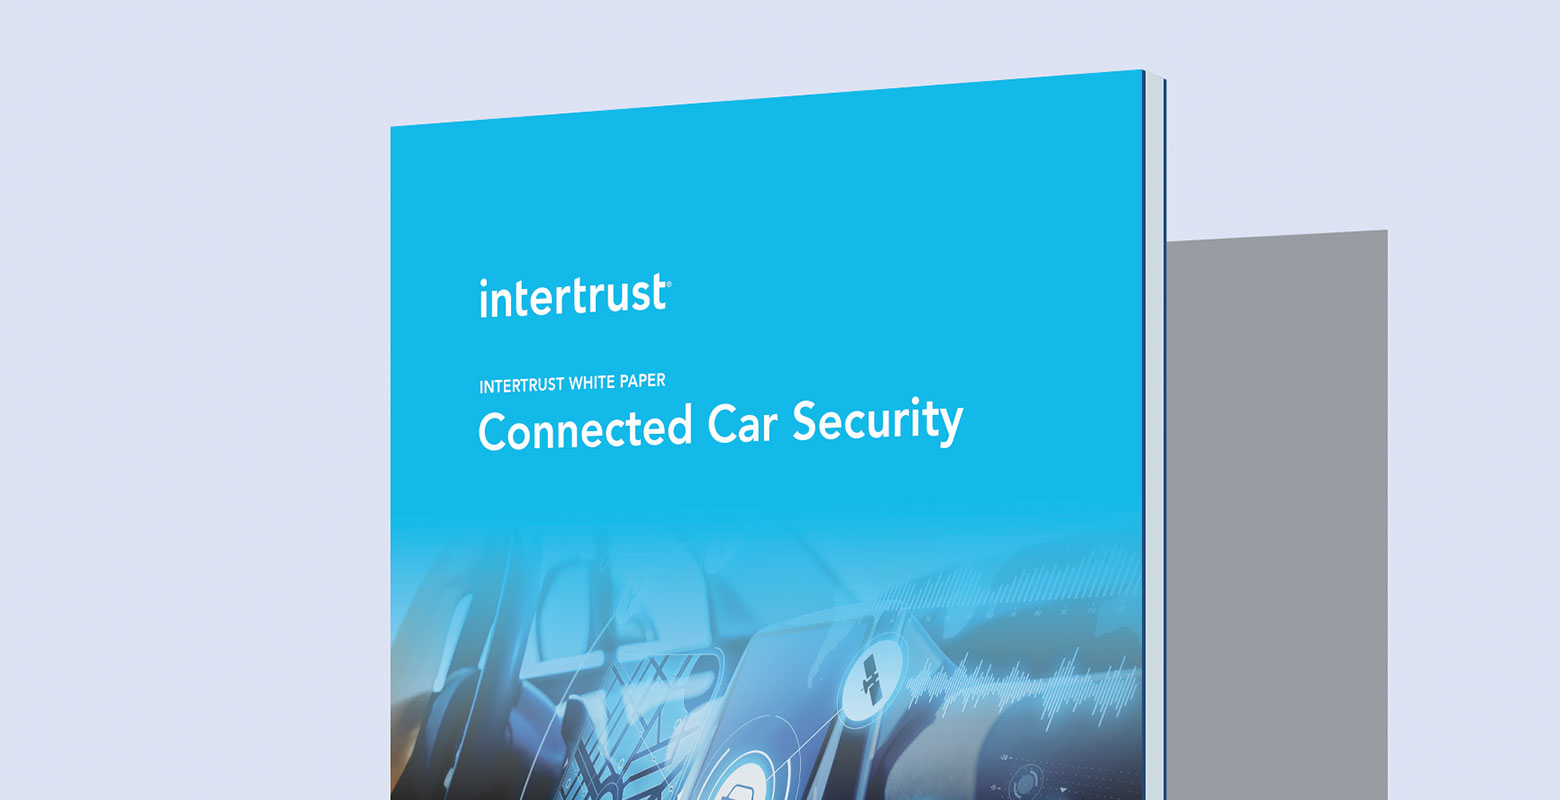 Connected car security hero graphic